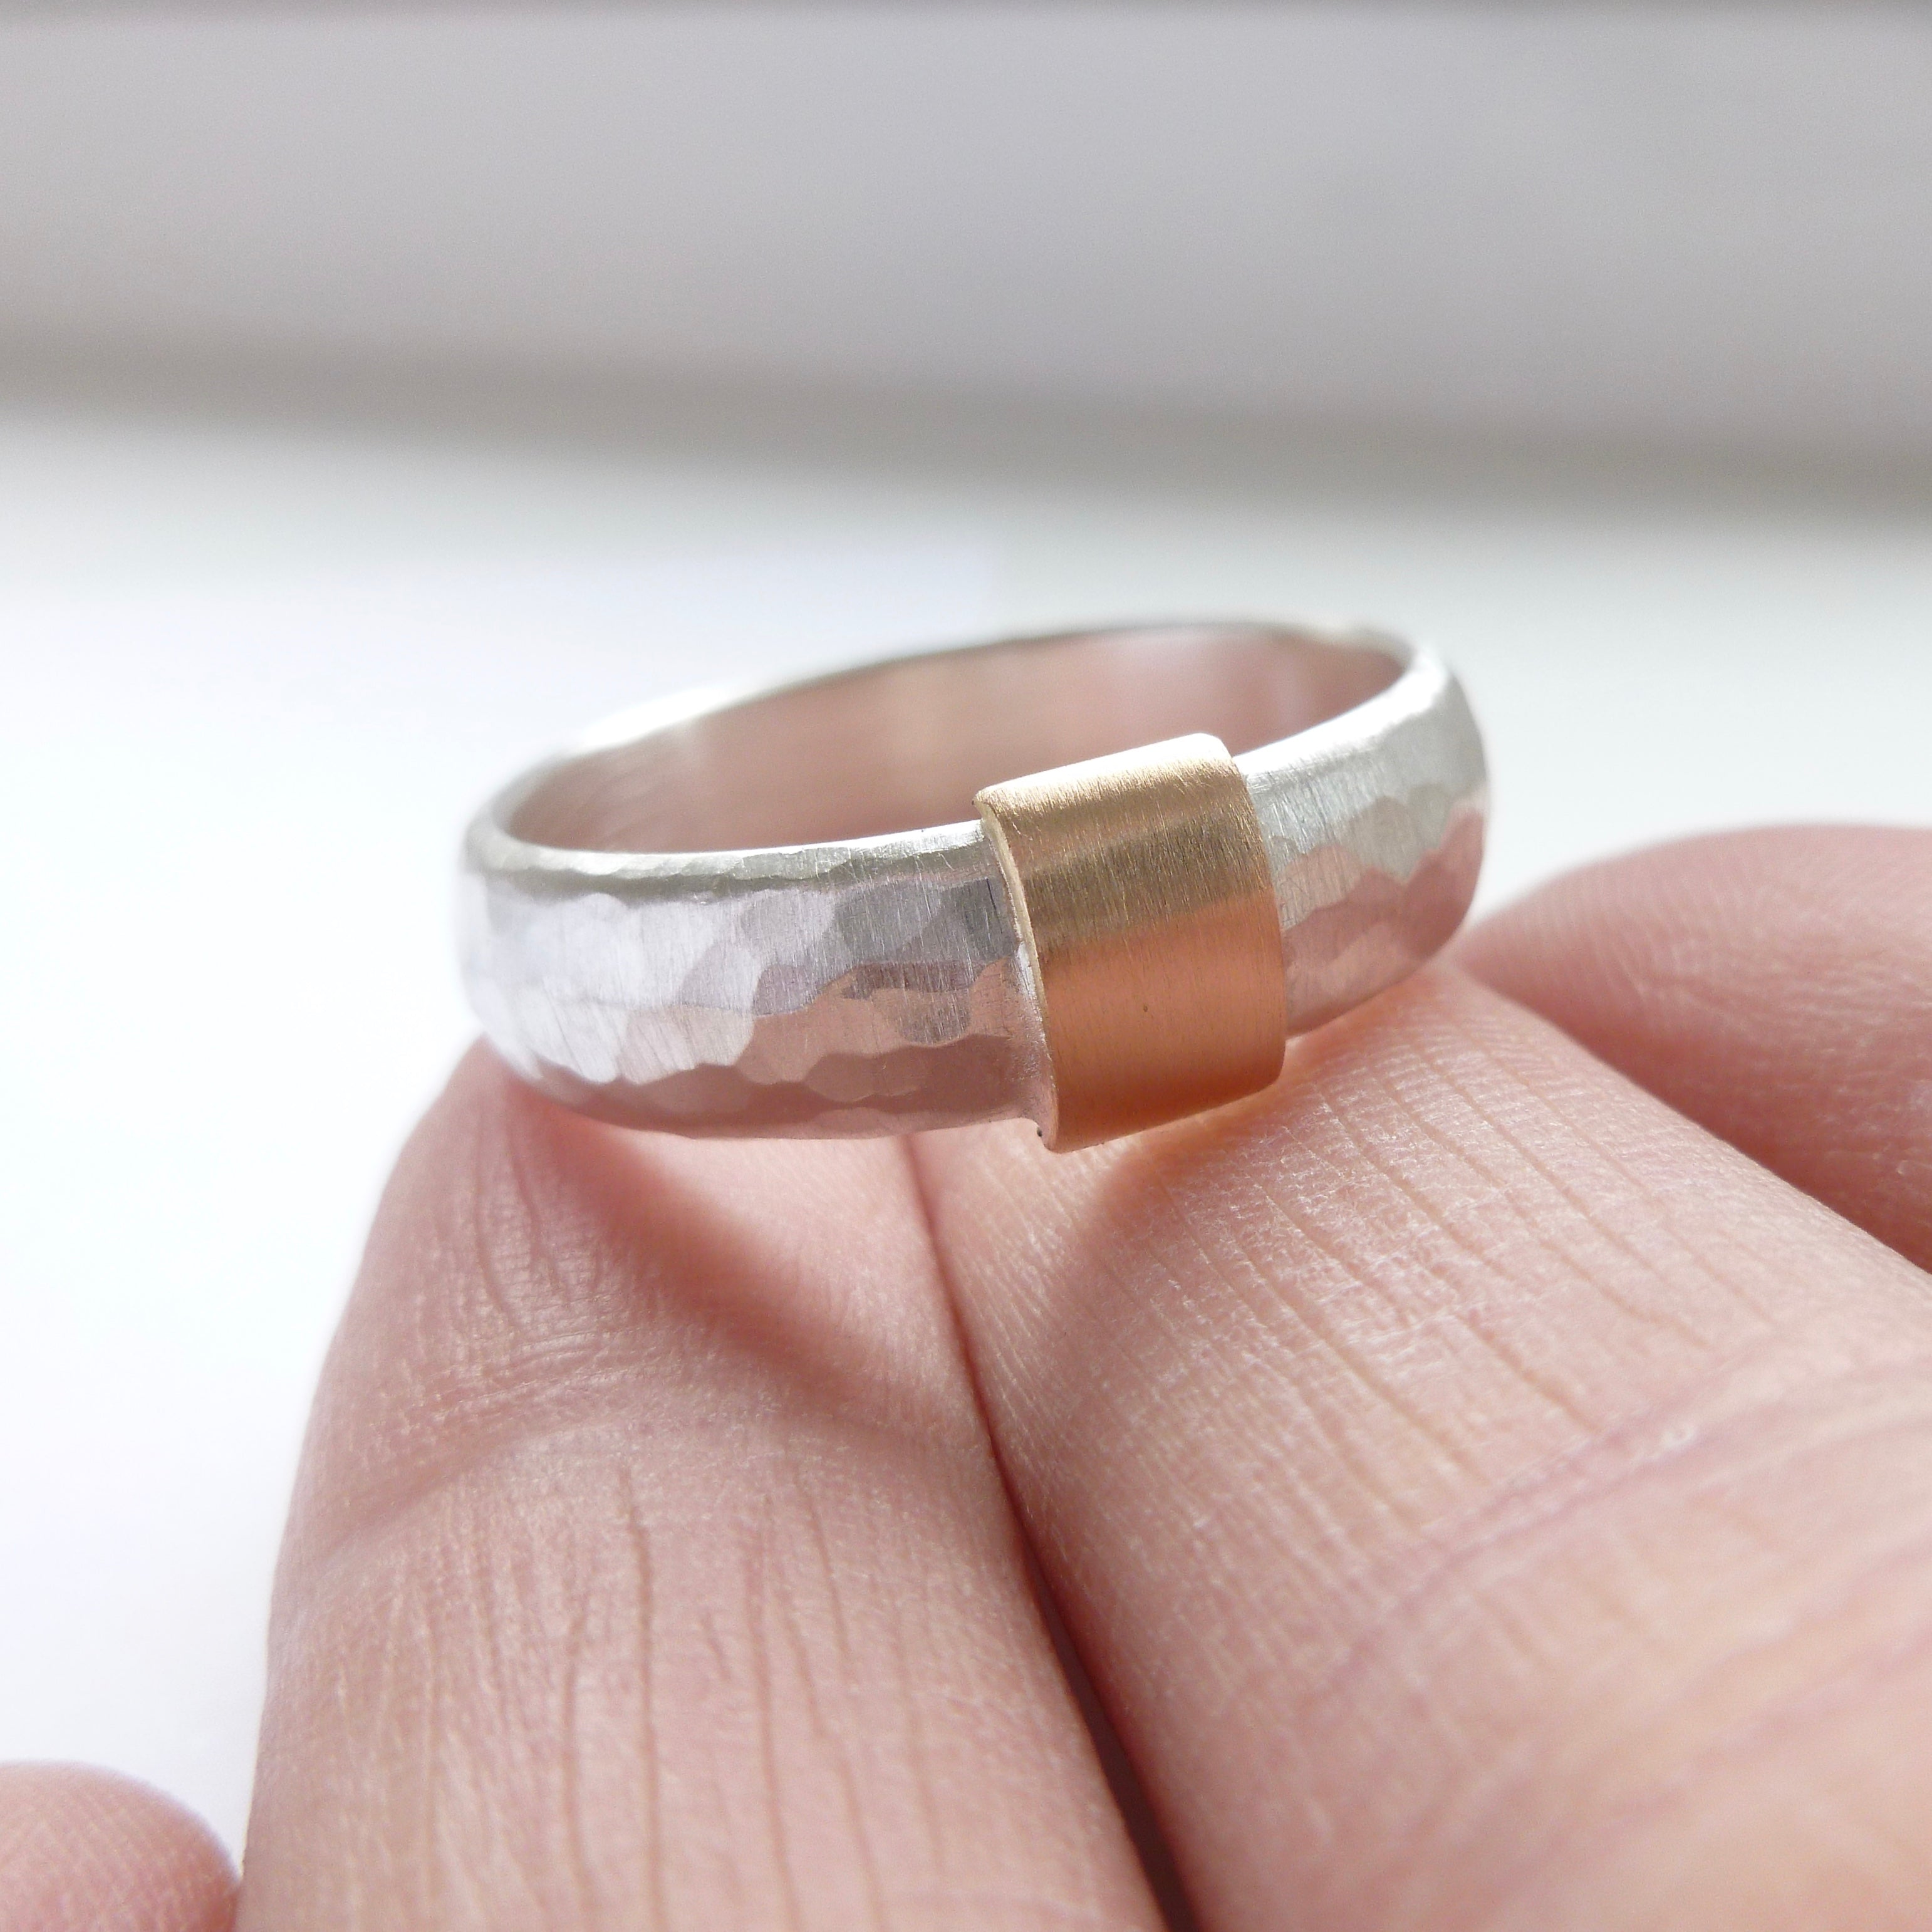 modern and unusual two tone silver and gold chunky ring for men or woman with a hammered finish. Handmade in UK